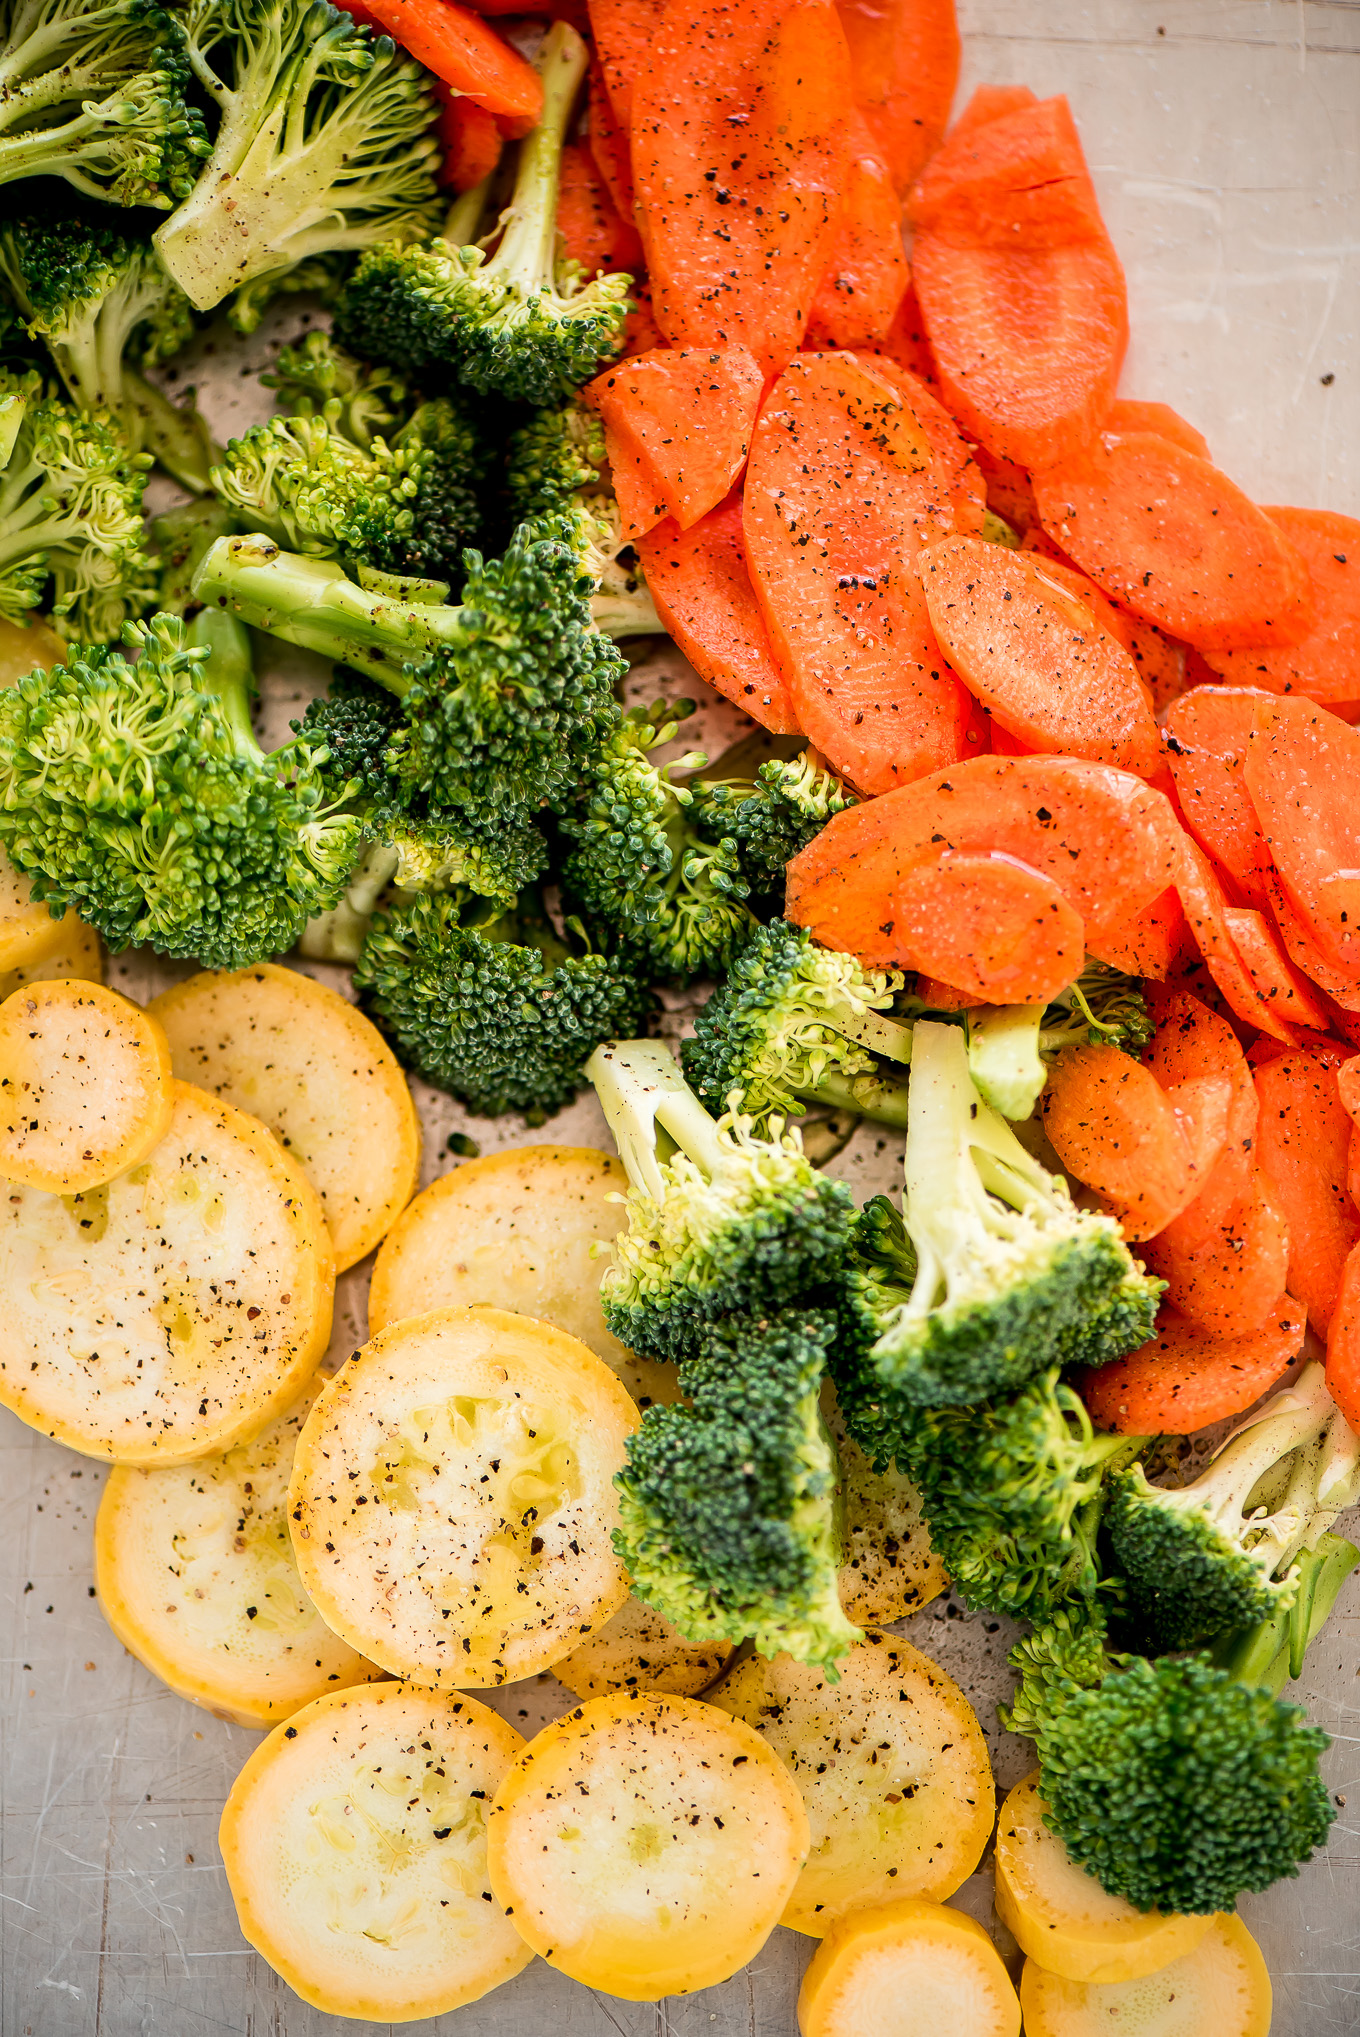 Raw carrot slices, broccoli, and summer squash on a sheet pan, sprinkled with salt and pepper.